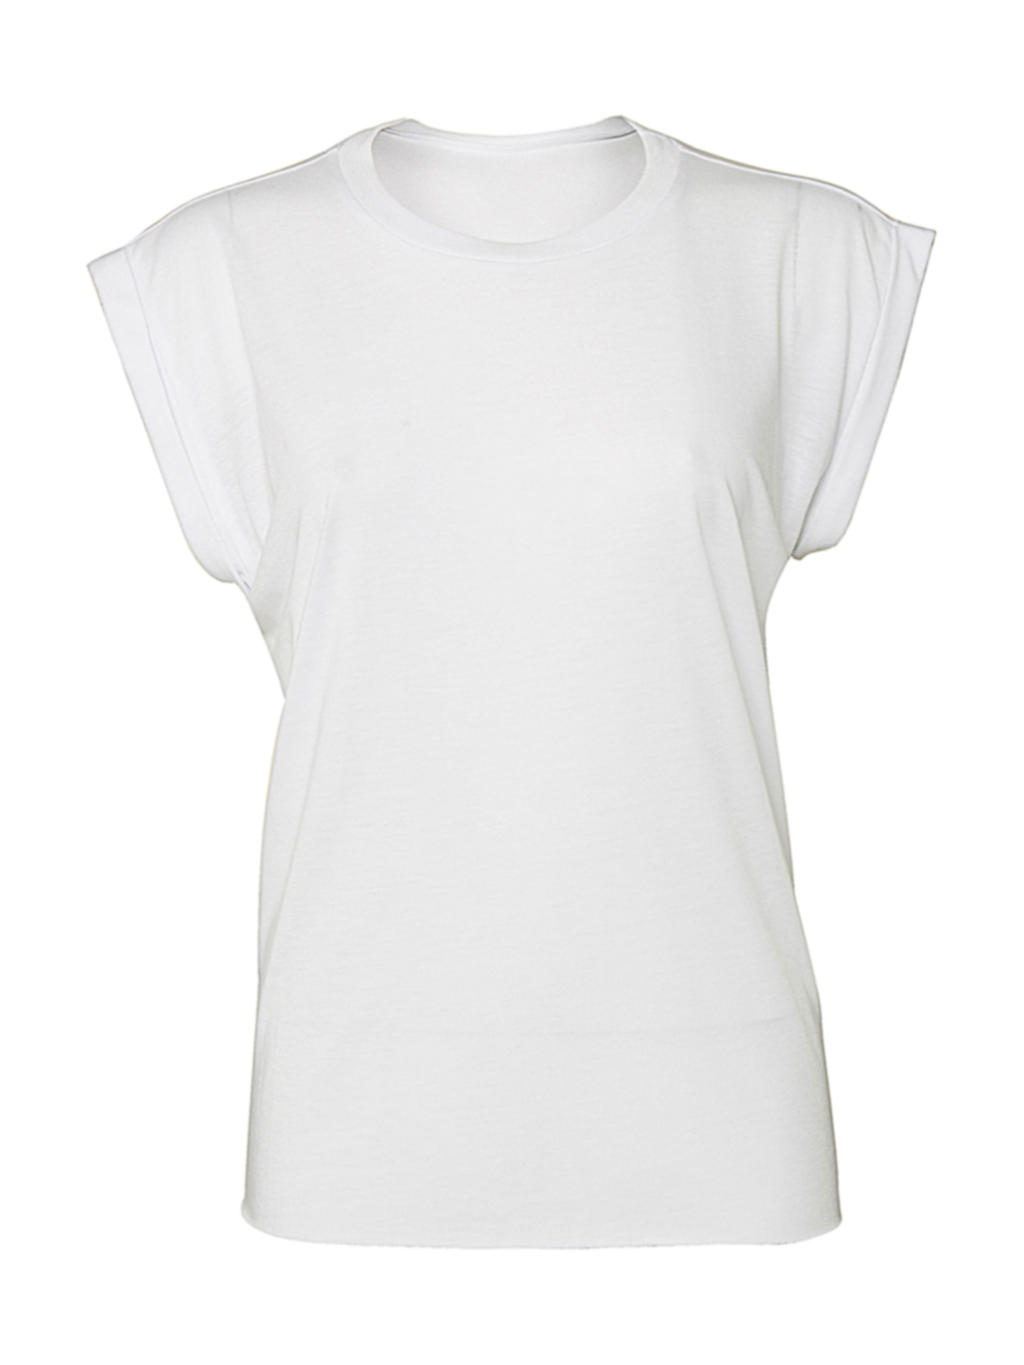  Womens Flowy Muscle Tee Rolled Cuff in Farbe White